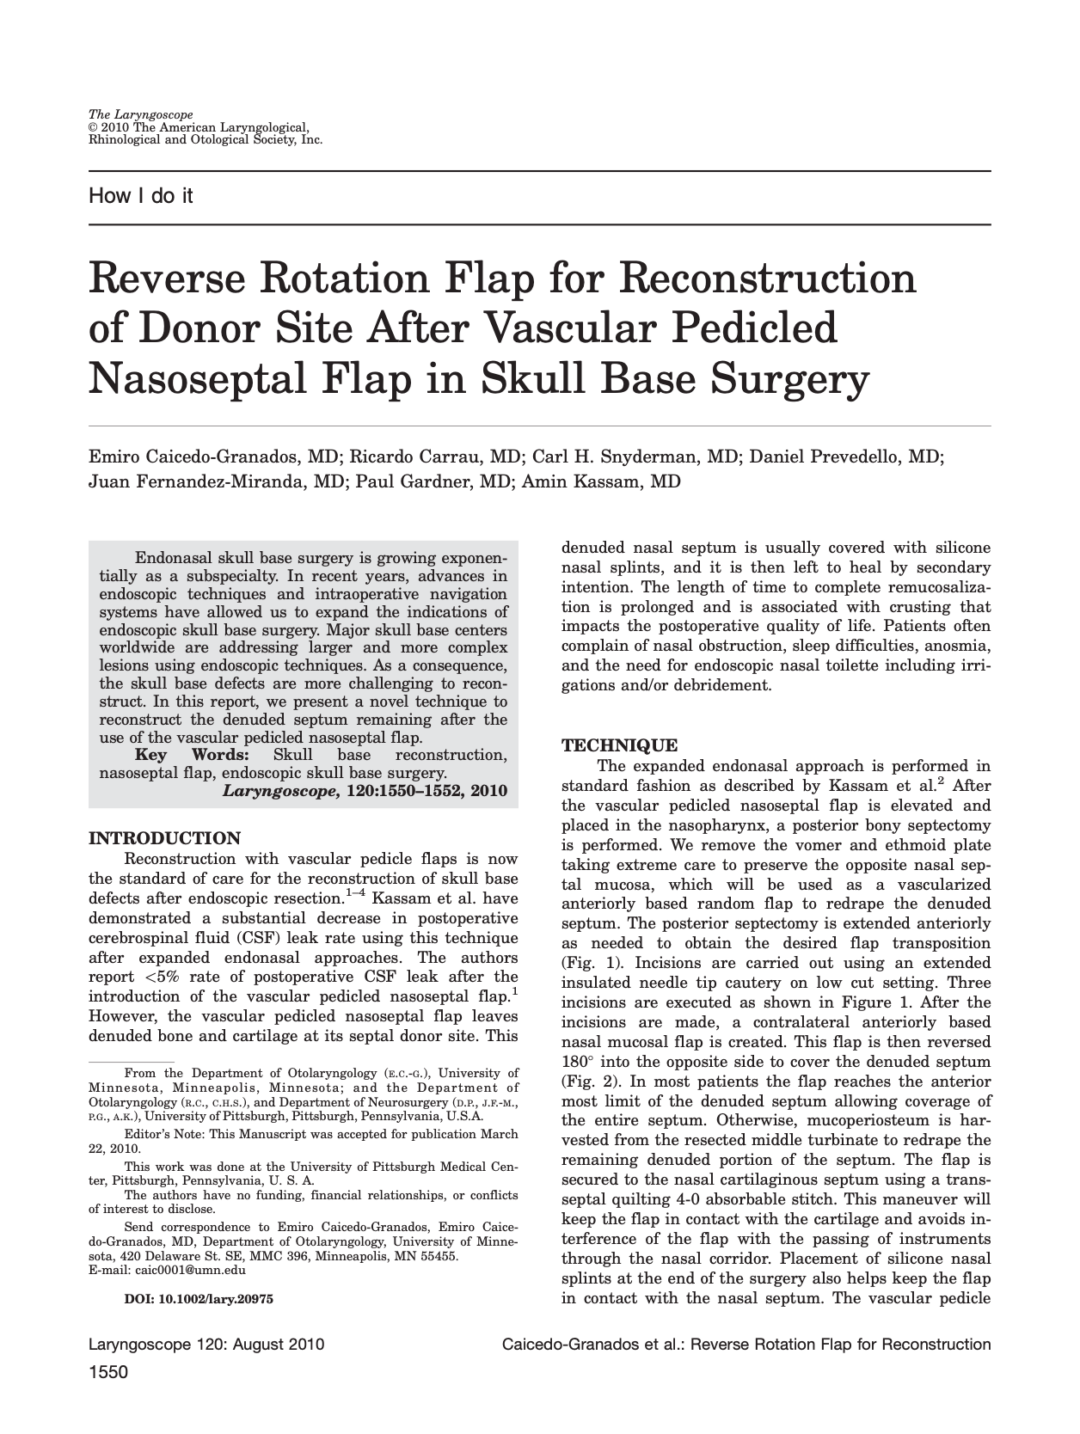 Reverse Rotation Flap for Reconstruction of Donor Site After Vascular Pedicled Nasoseptal Flap in Skull Base Surgery